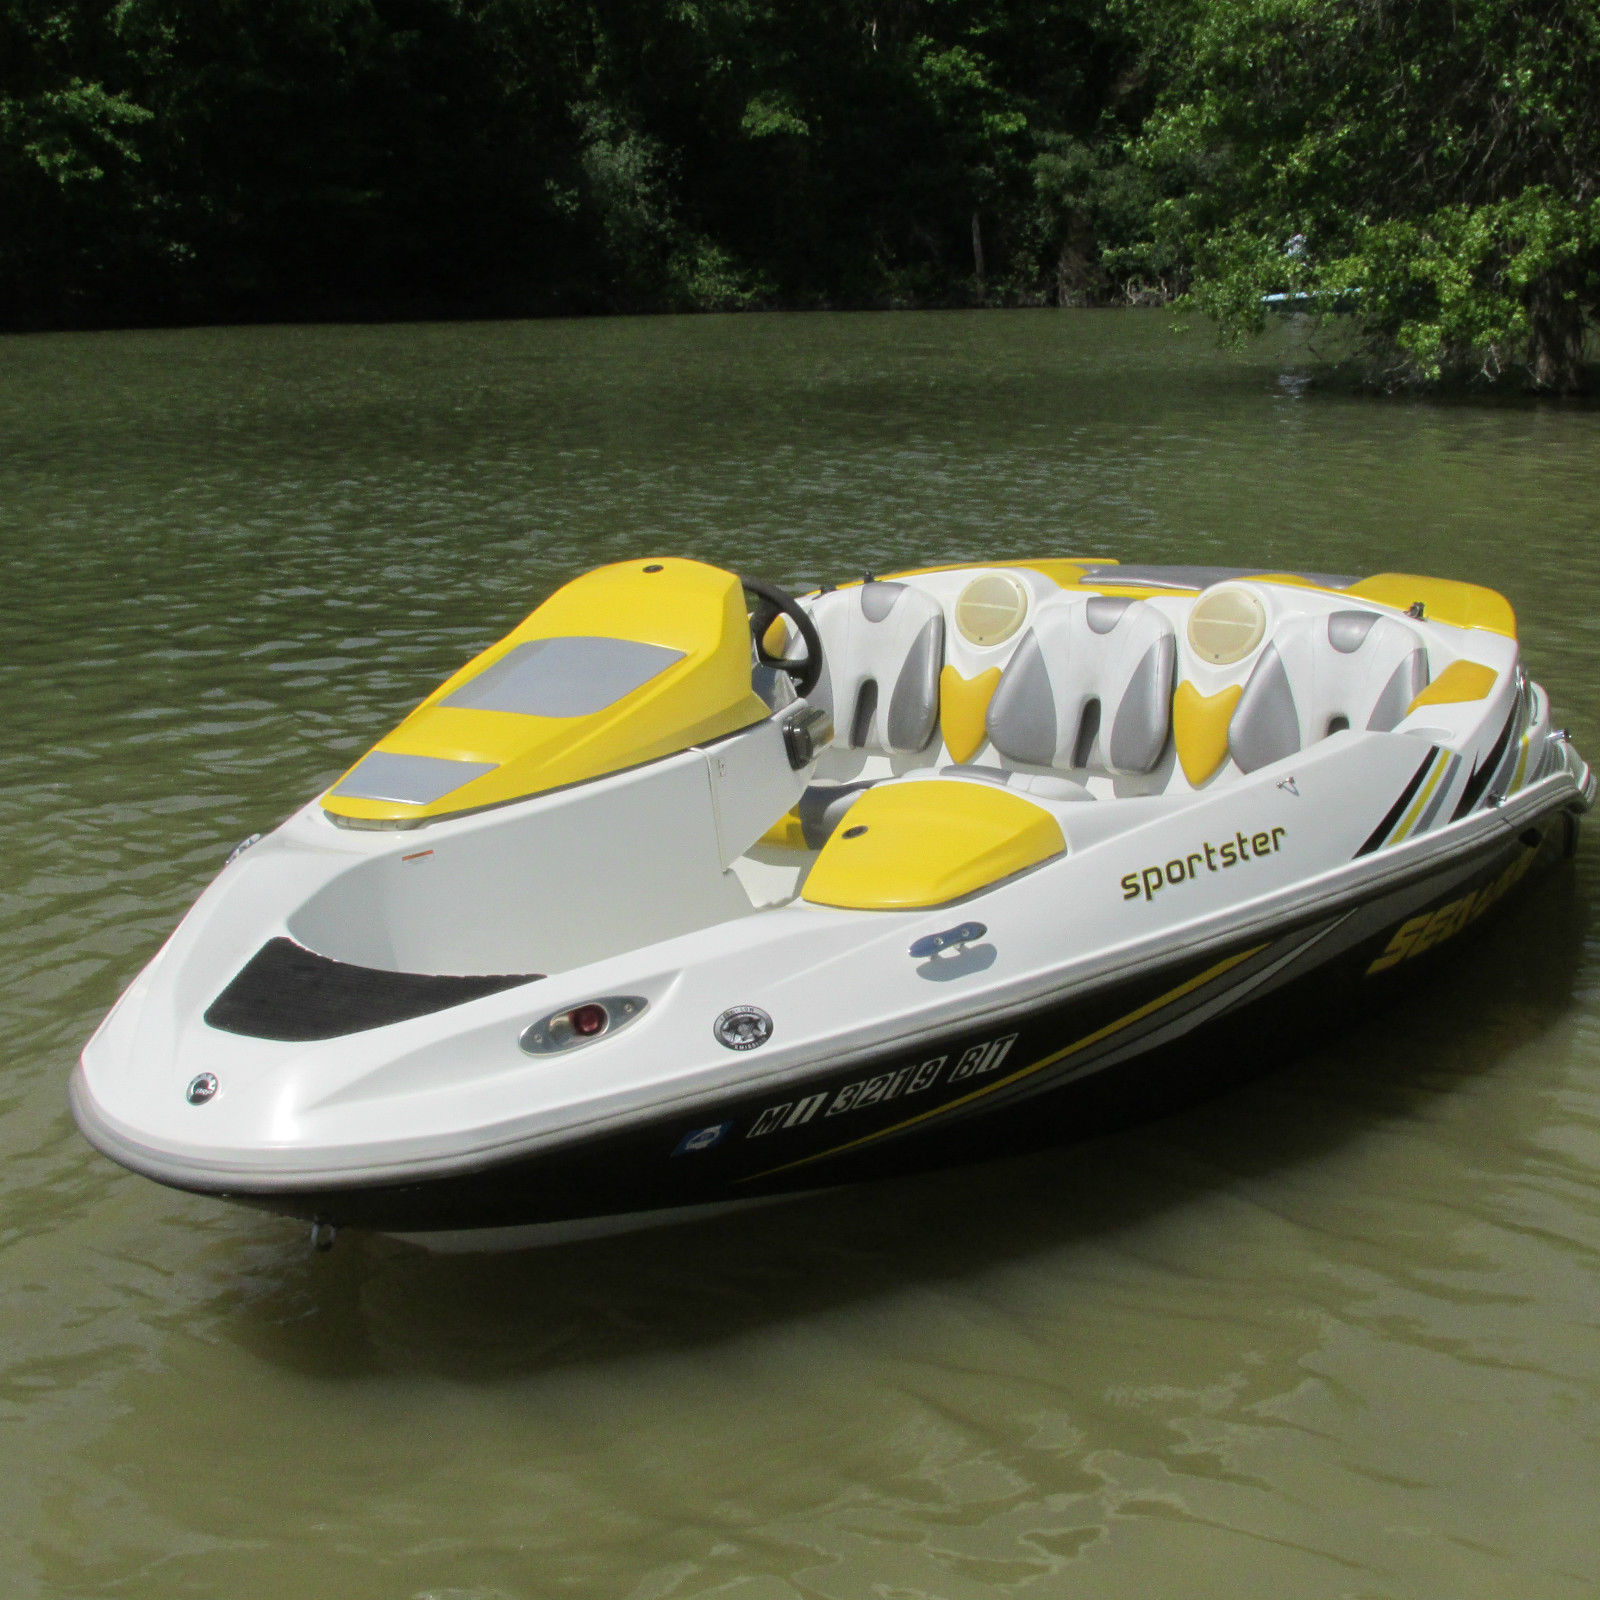 Seadoo 2005 for sale for 8,500